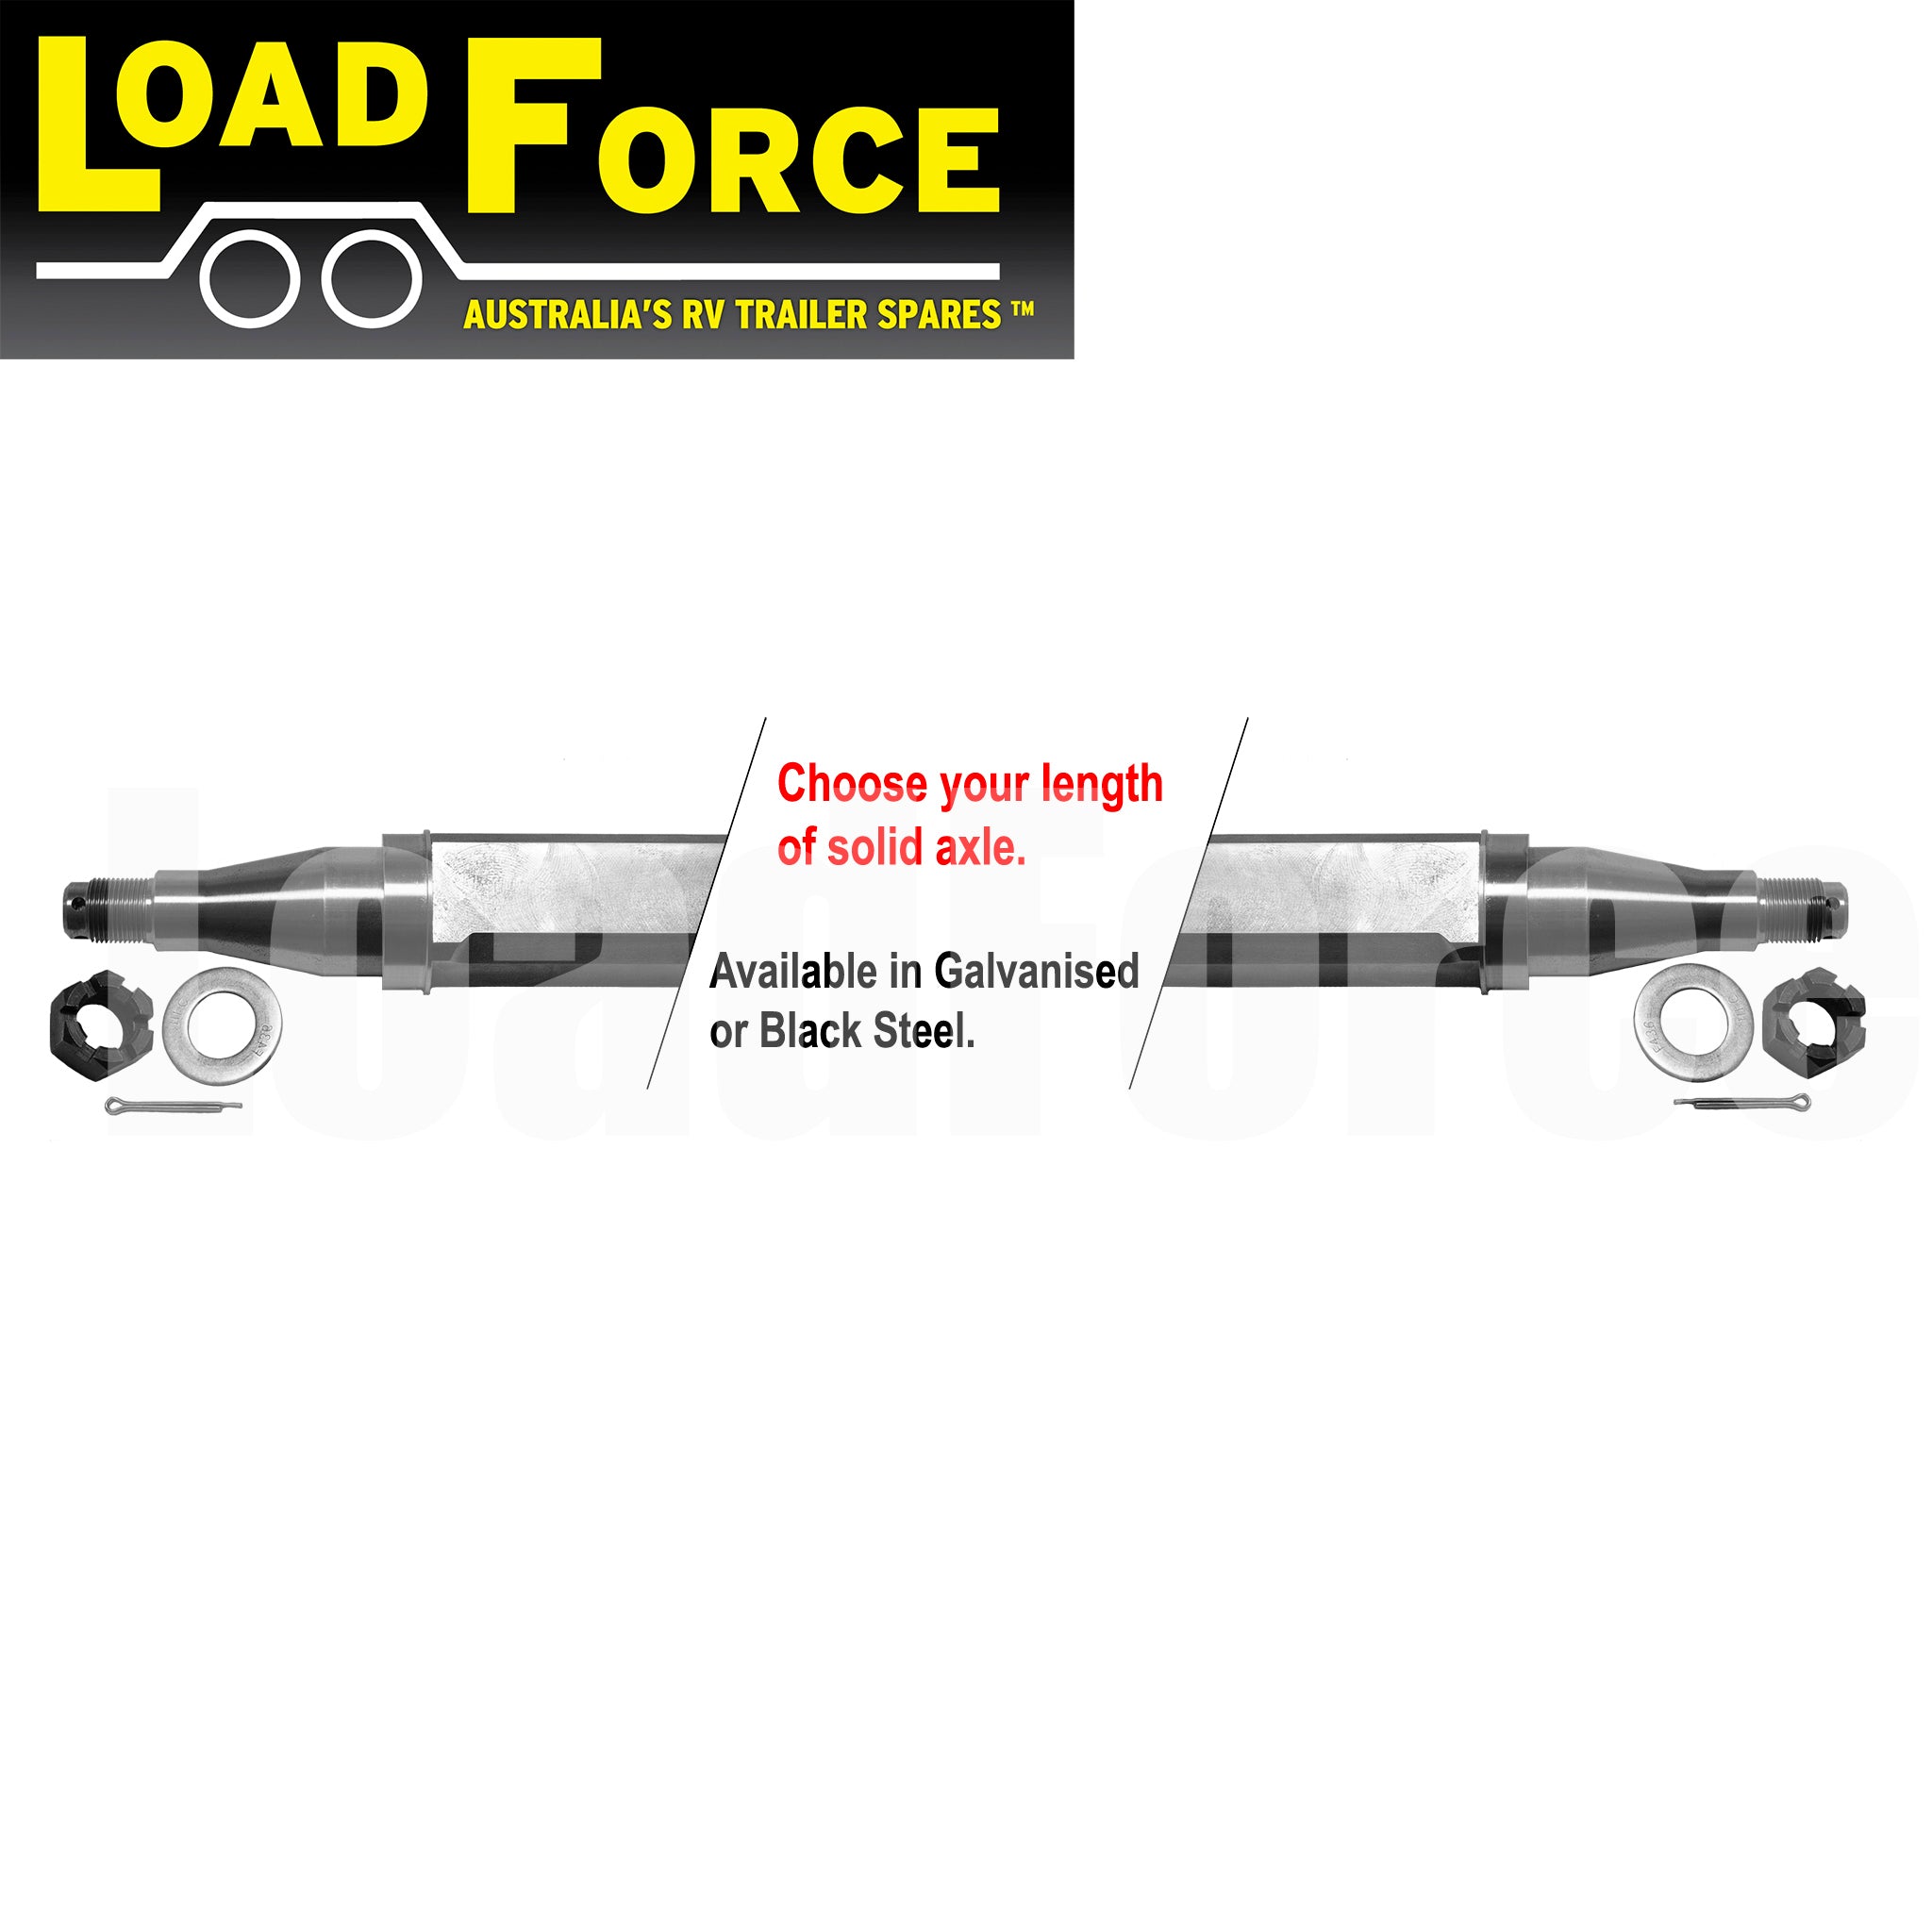 LoadForce Axle 50mm square TX bearing turn 2500kg rating - choose length and finish